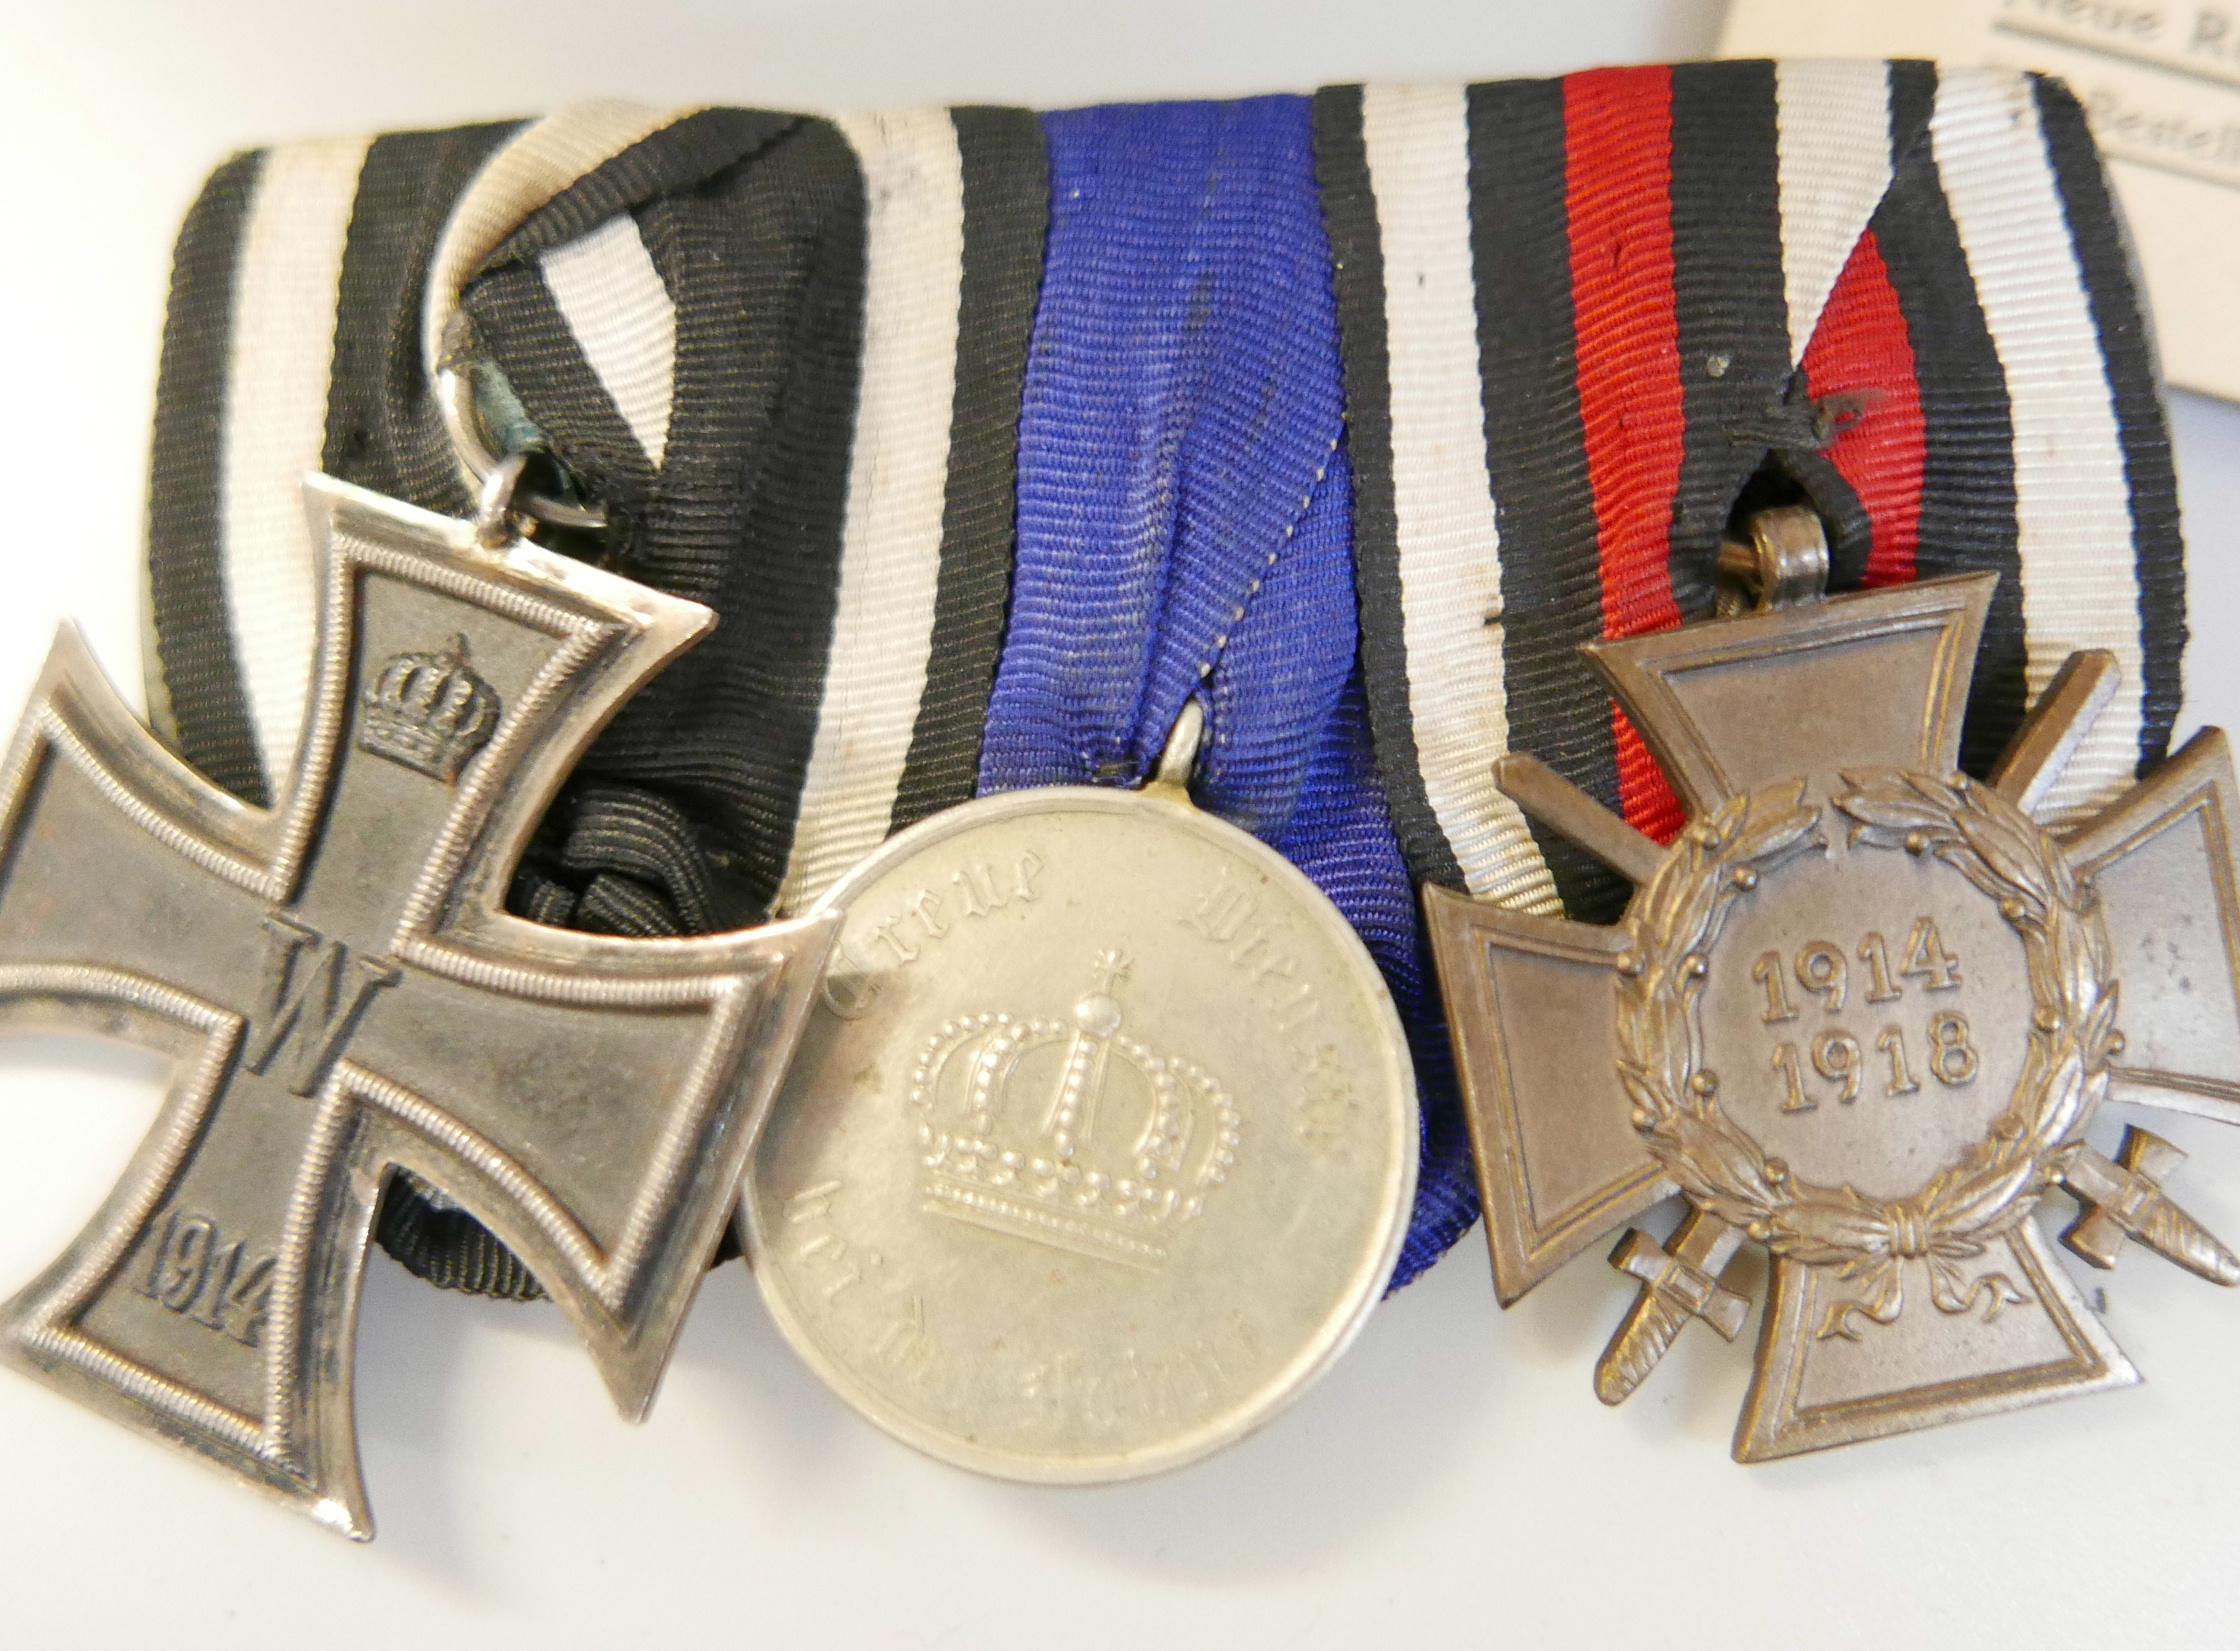 A set of three WWI German medals and a collection of related ephemera, some later WWII period - Image 6 of 6